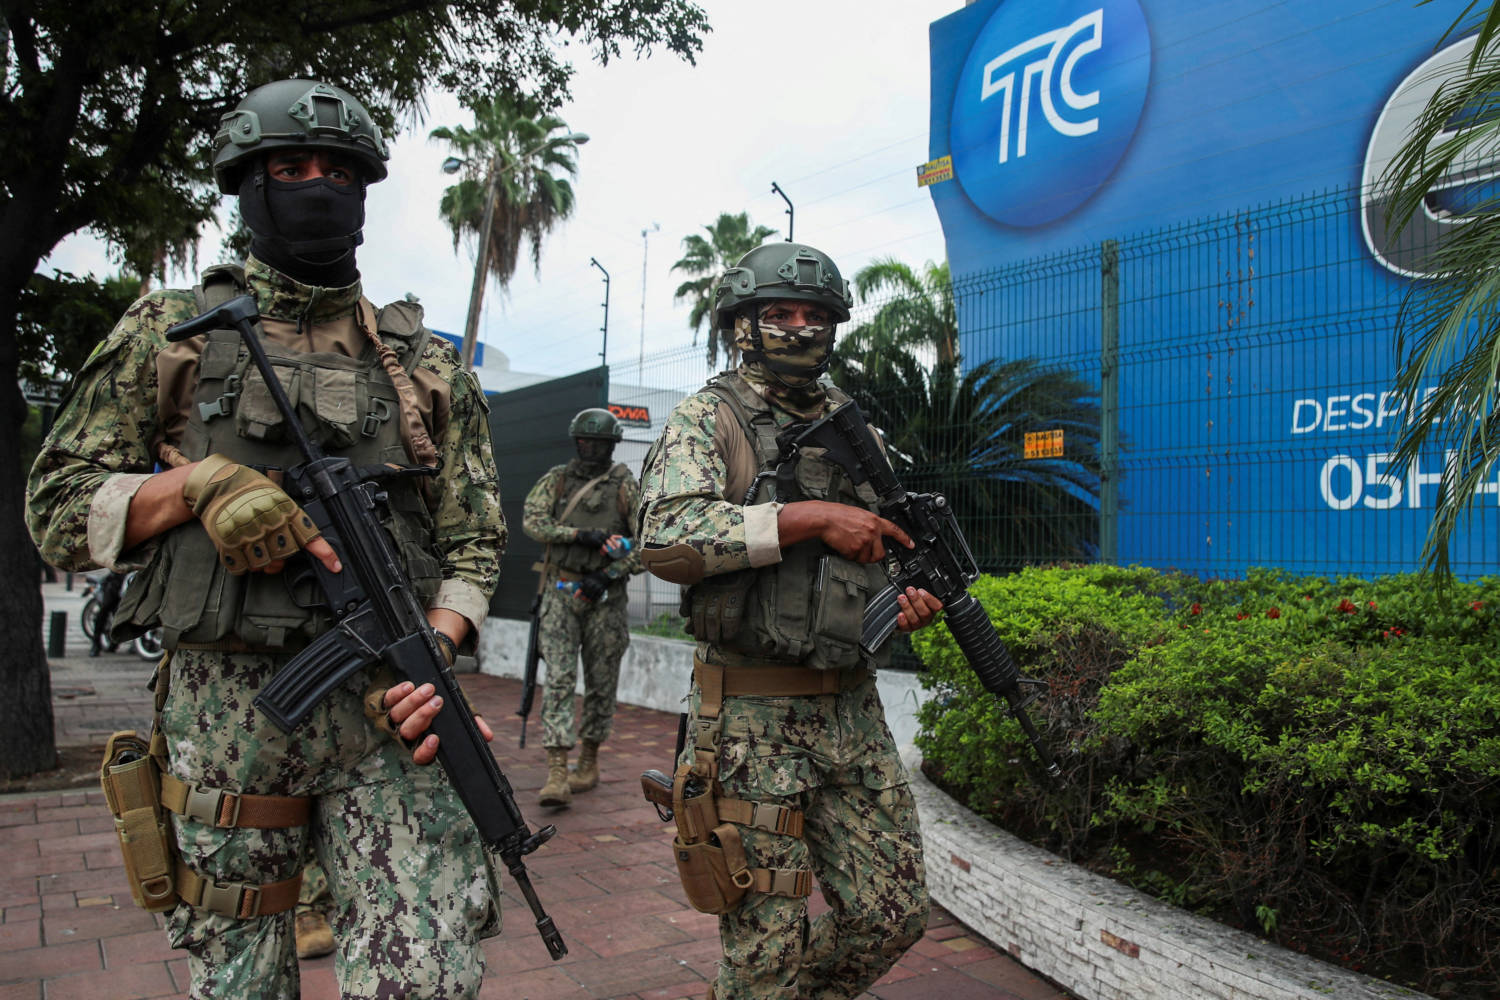 File Photo: Members Of Security Forces Stand Guard Outside Local Tv Station Tc Following Ecuador's President Daniel Noboa's Visit, In Guayaquil